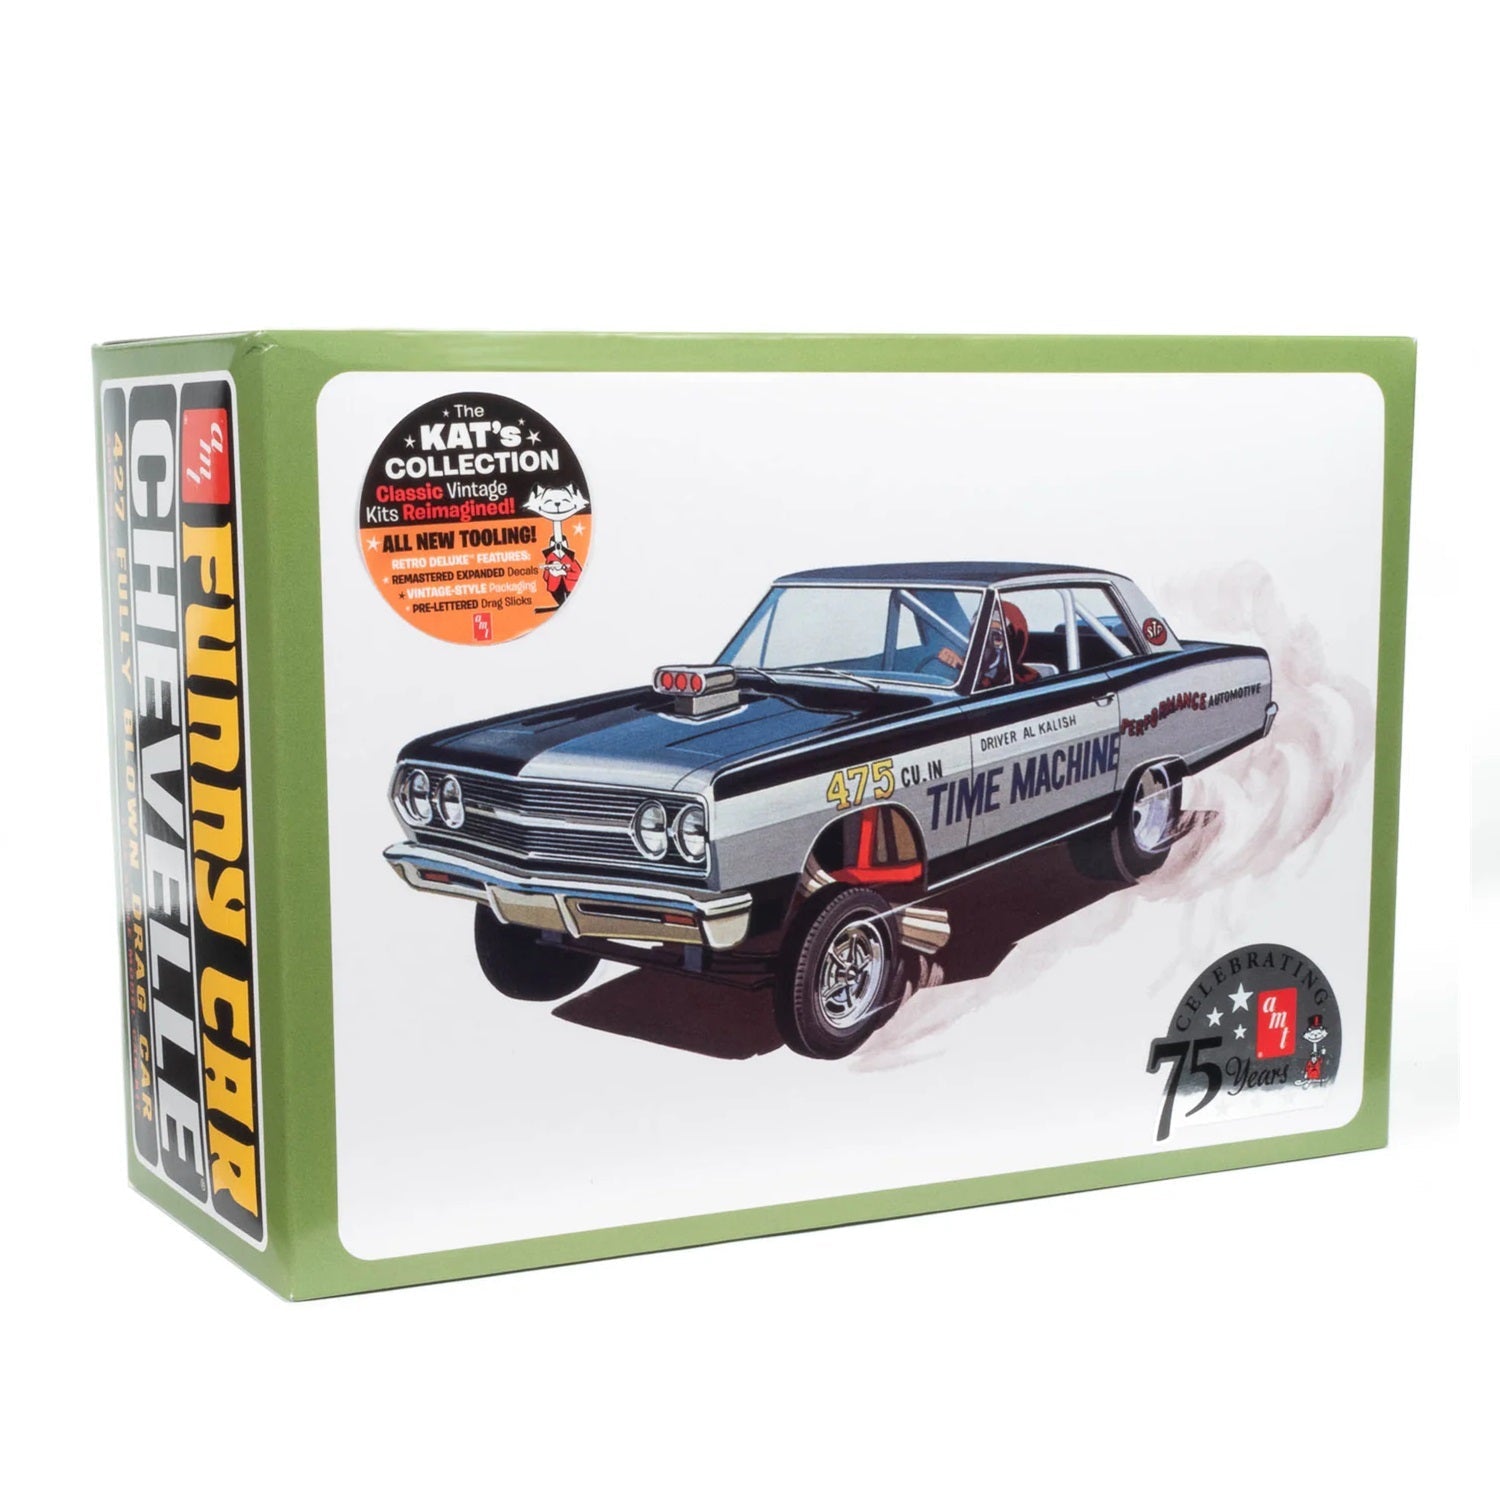 AMT 1965 Chevy Chevelle Altered Wheelbase Funny Car "Time Machine" Plastic Model Kit, 1/25 Scale